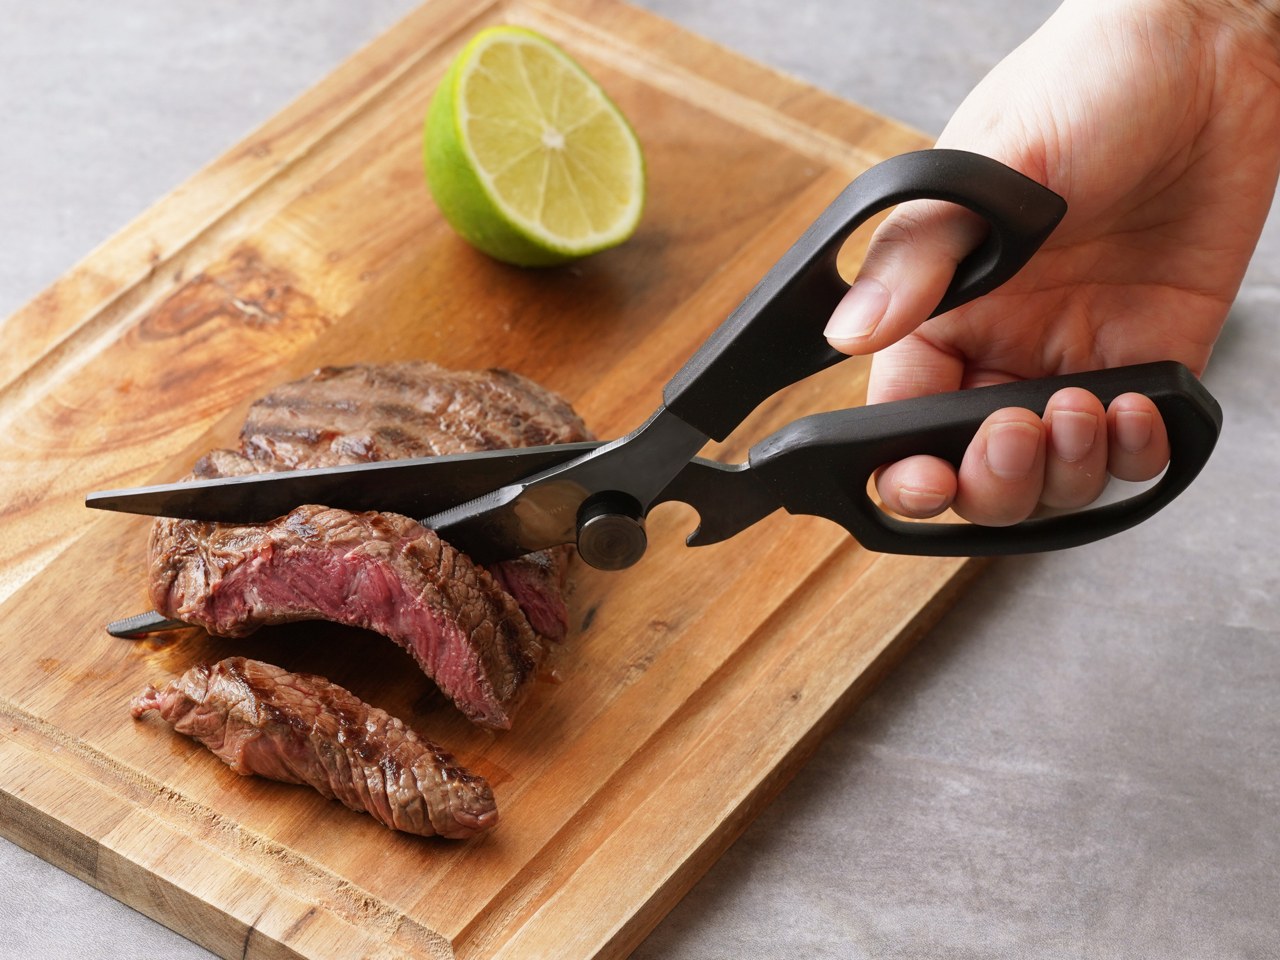 14 Kitchen Tools Beloved By Famous Chefs